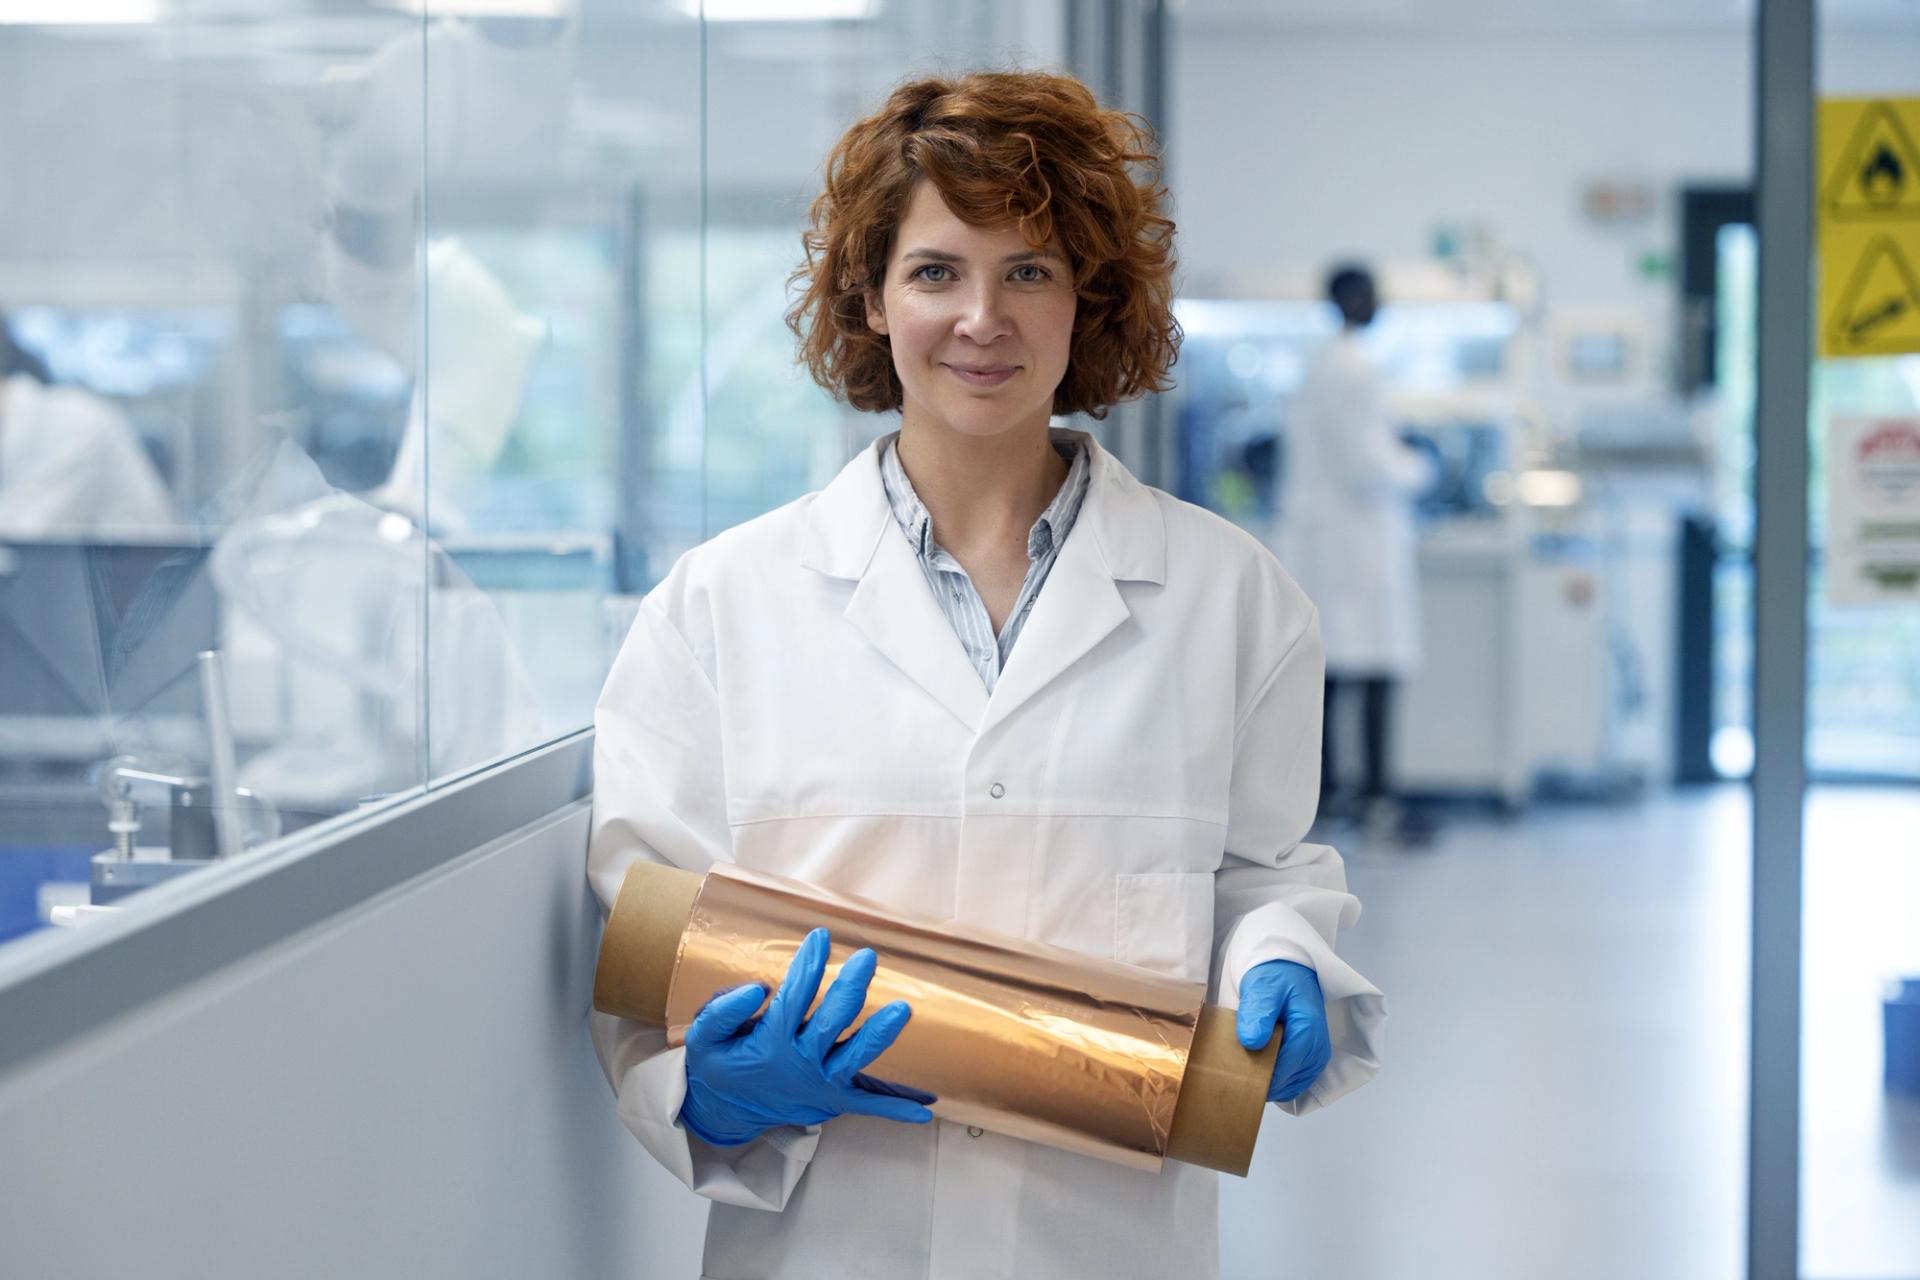 Image from battery production facility. Female research engineer with a copper roll for the anode.